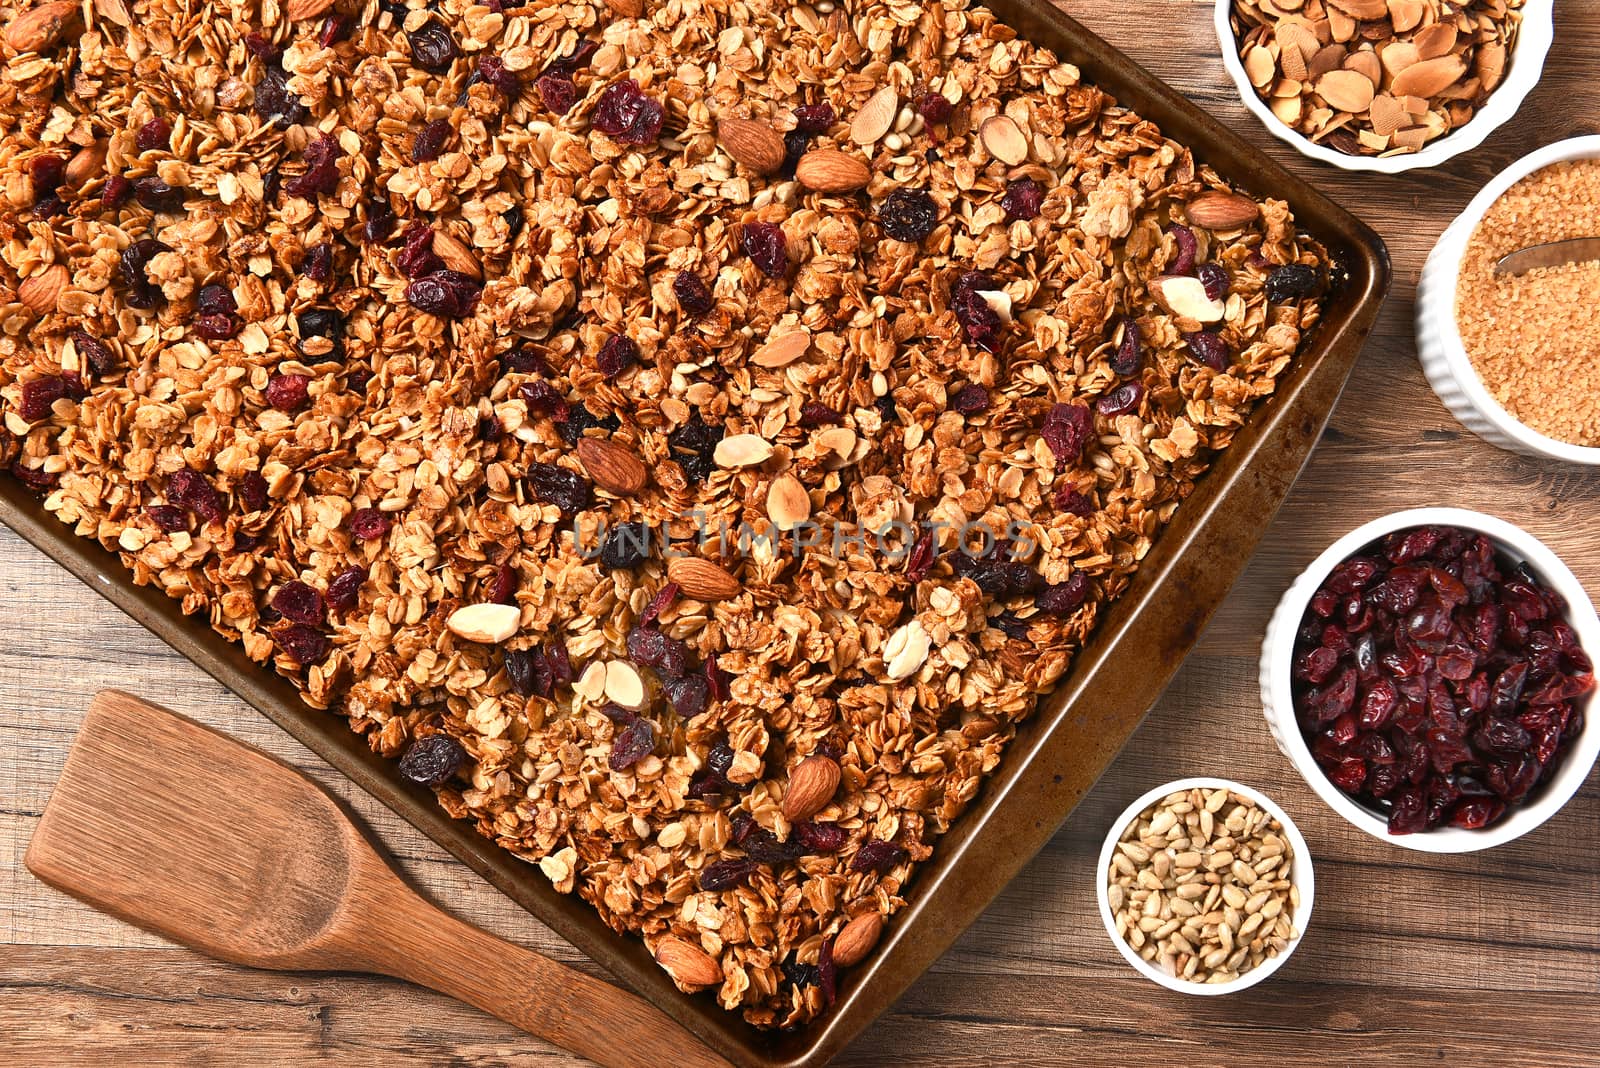 Horizontal overhead view of fresh homemade granola. Closeup of a baking sheet filled with the tasty, healthful food with containers of ingredients.